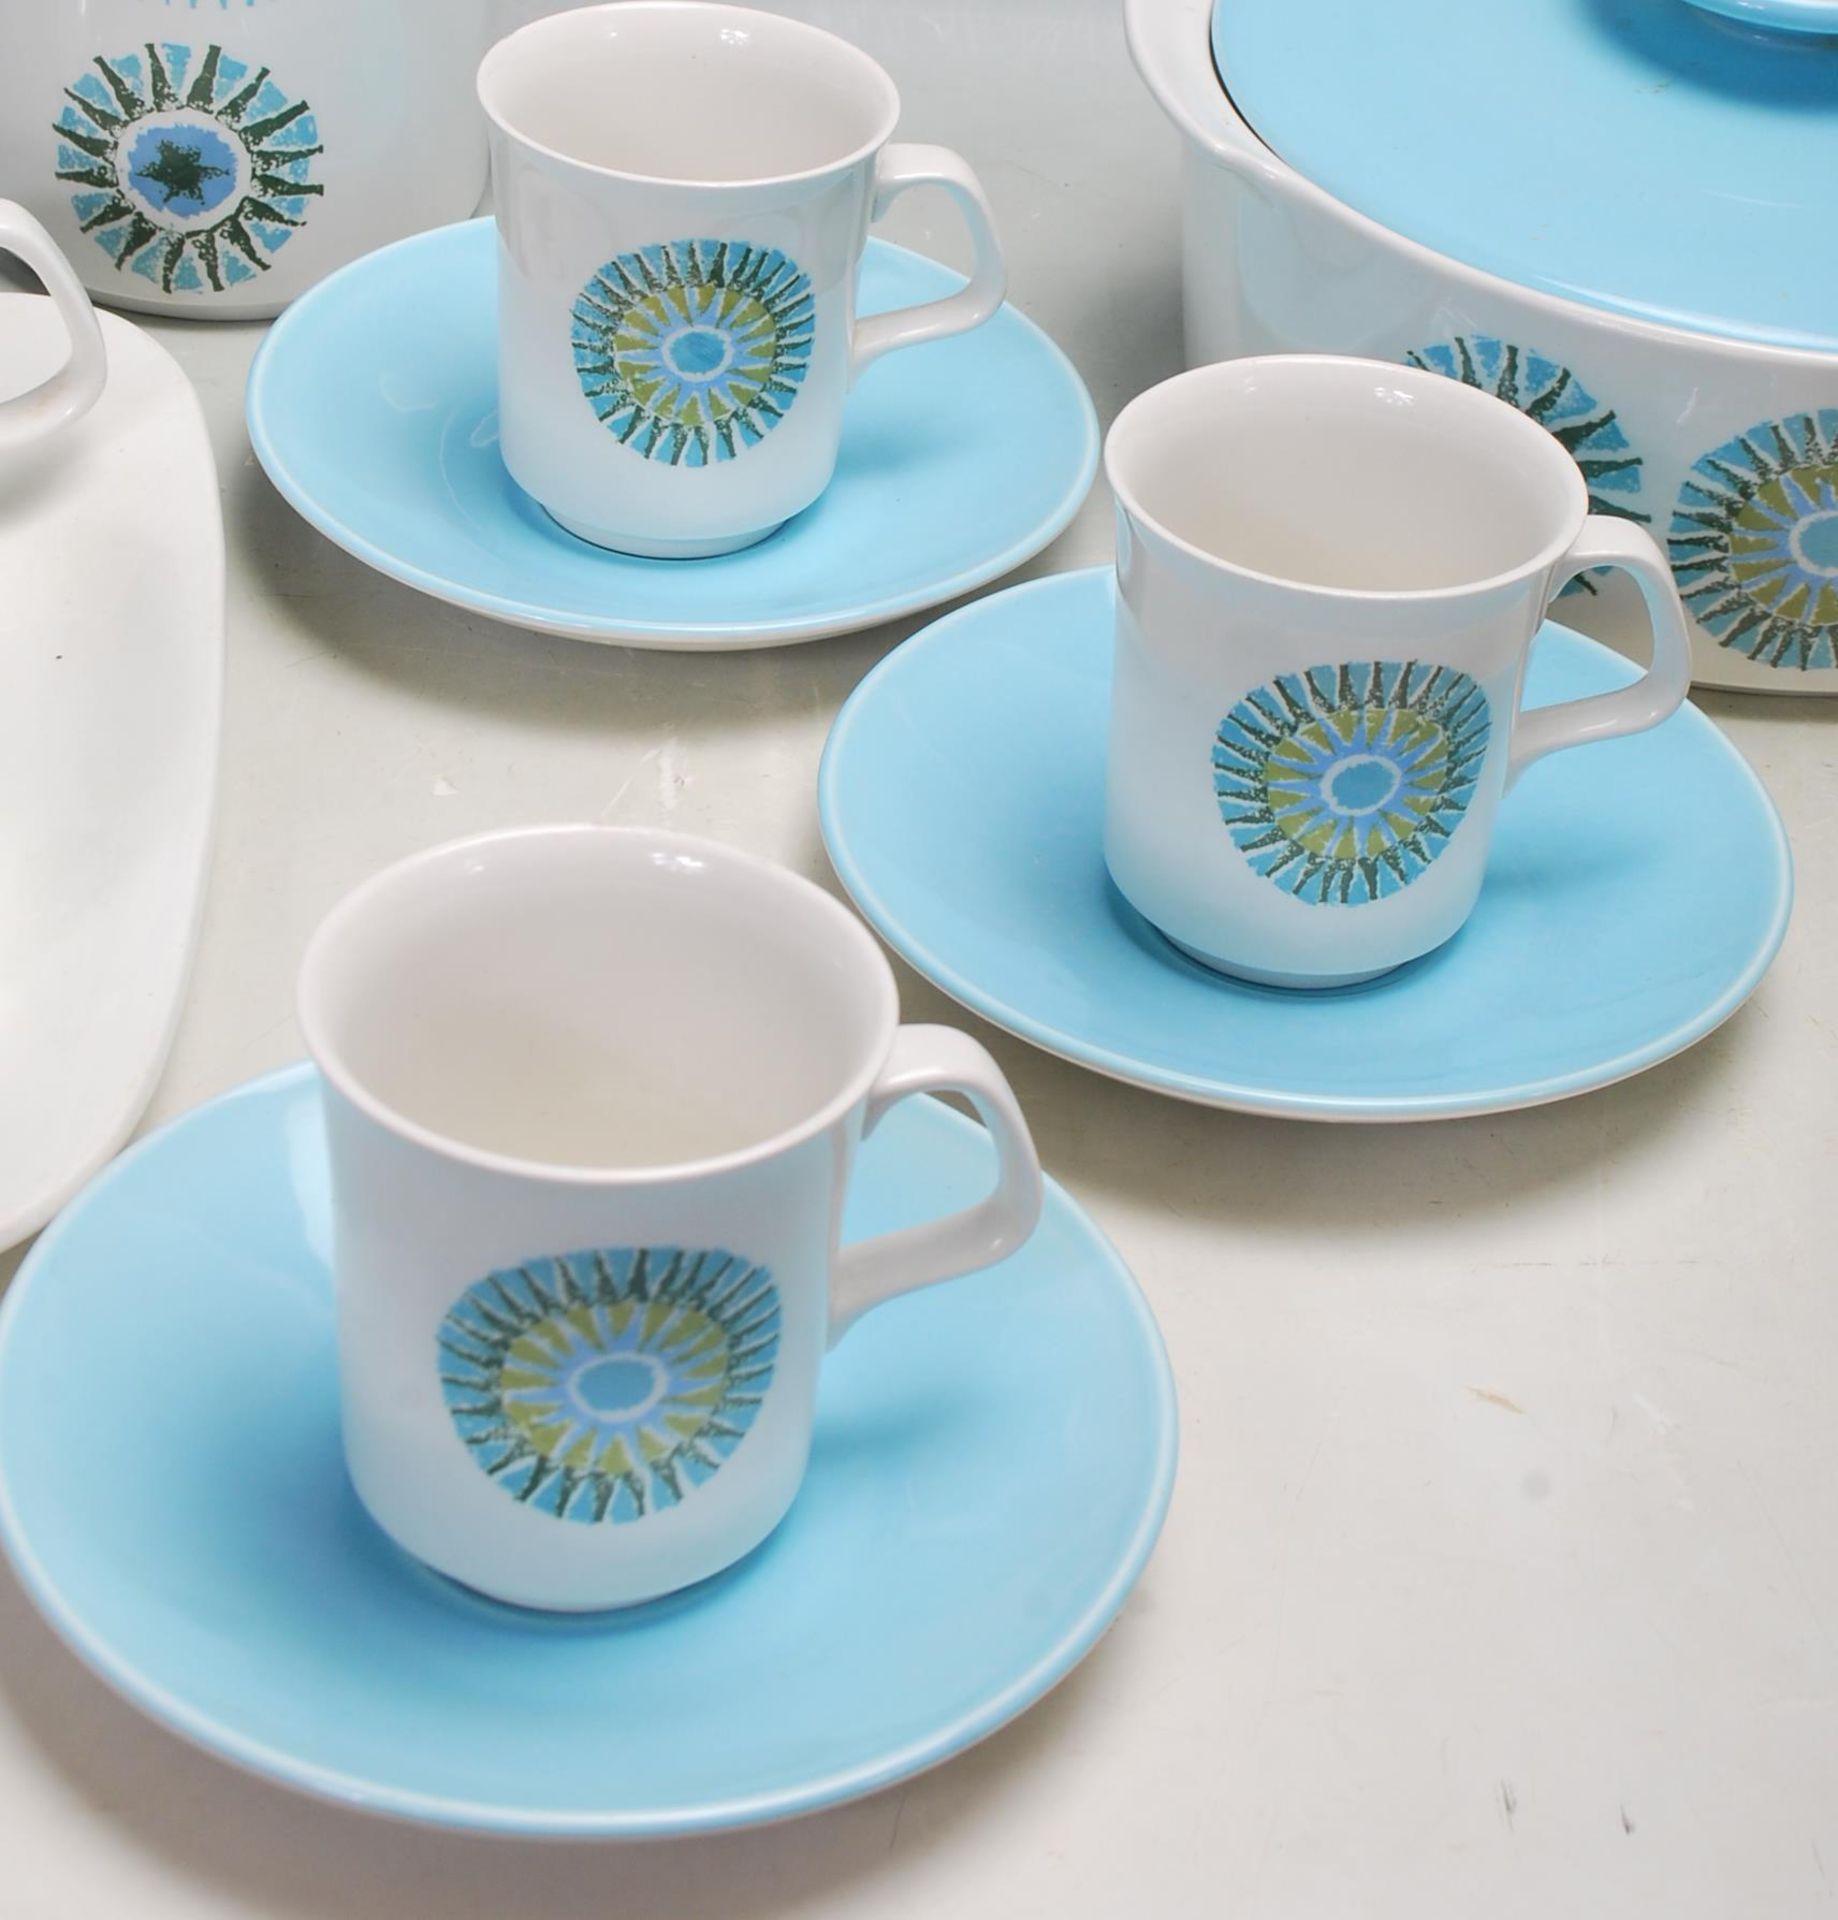 RETRO VINTAGE LATE 20TH CENTURY DINNER SERVICE BY MIDWINTER AND JG MEAKIN STUDIO. - Image 4 of 14